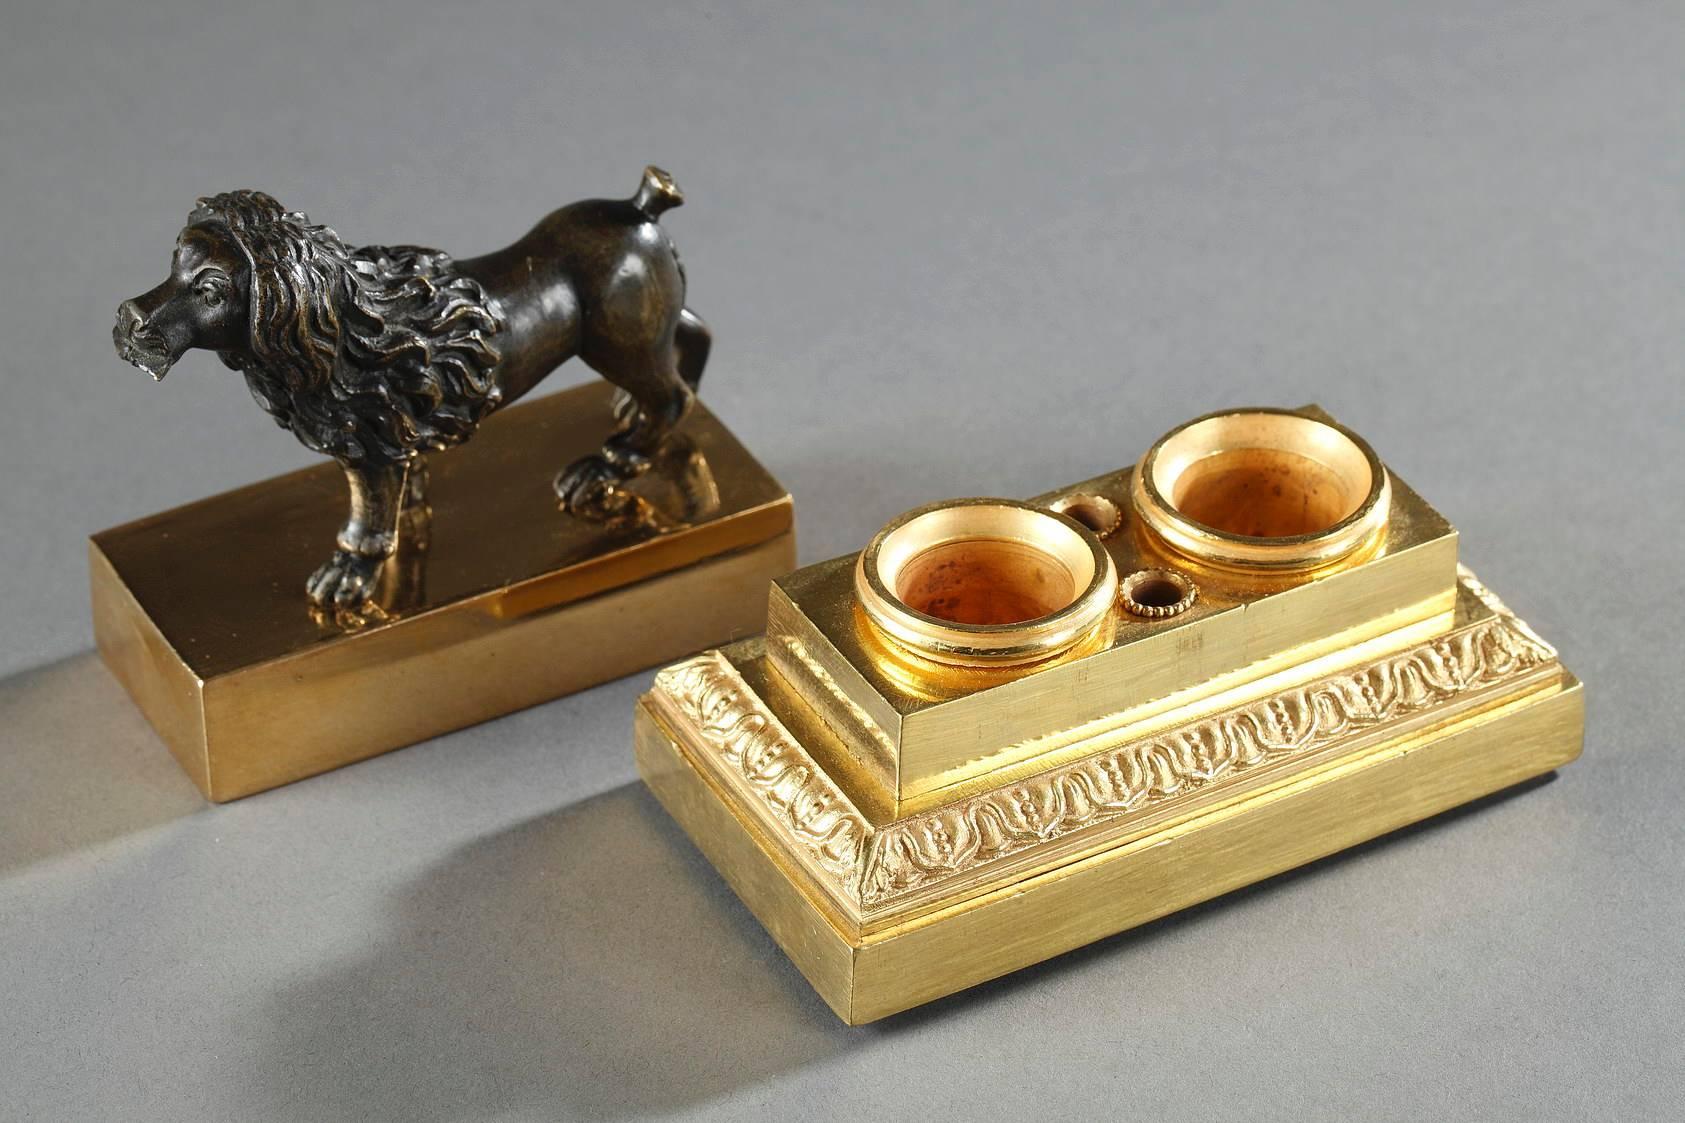 Restauration inkstand composed of a high, gilt bronze base with two inkwells and two penholders, decorated with a frieze of stylized flowers. The rectangular lid is topped by a patinated-bronze dog who is holding a letter in his mouth,
 
 circa